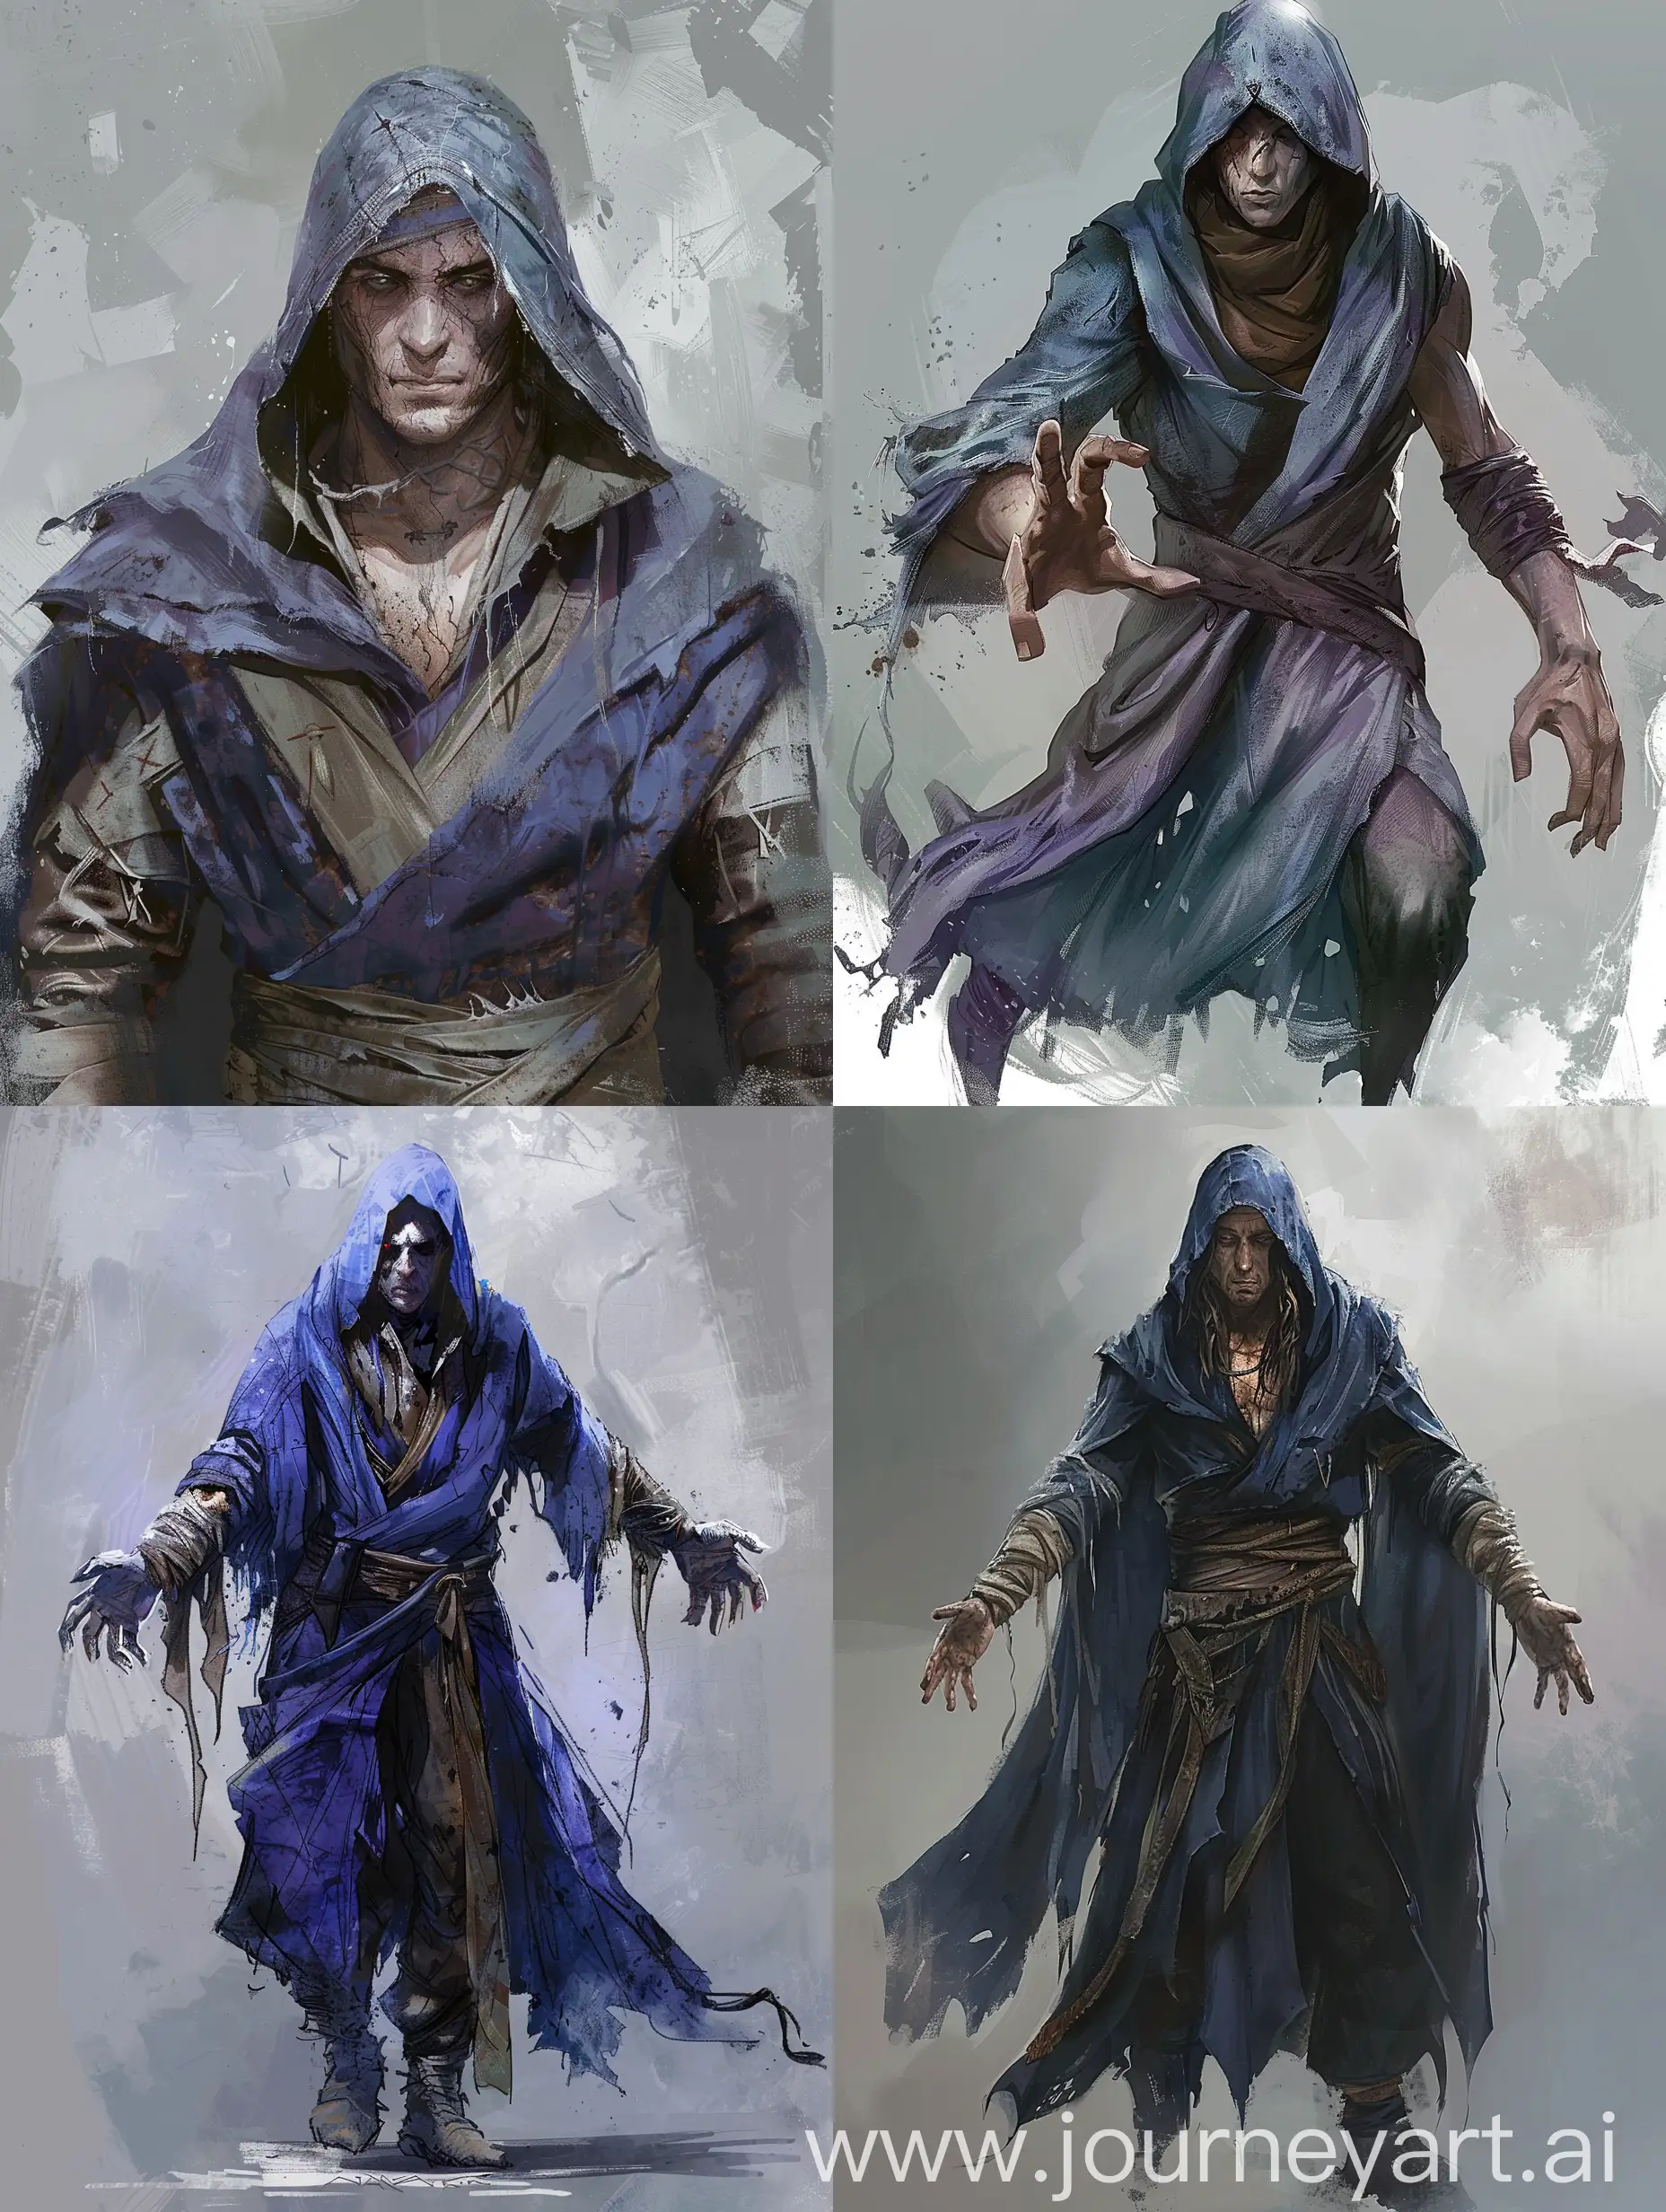 Sad-Wizard-in-Fading-Indigo-Robes-Blind-Eyes-and-Pale-Skin